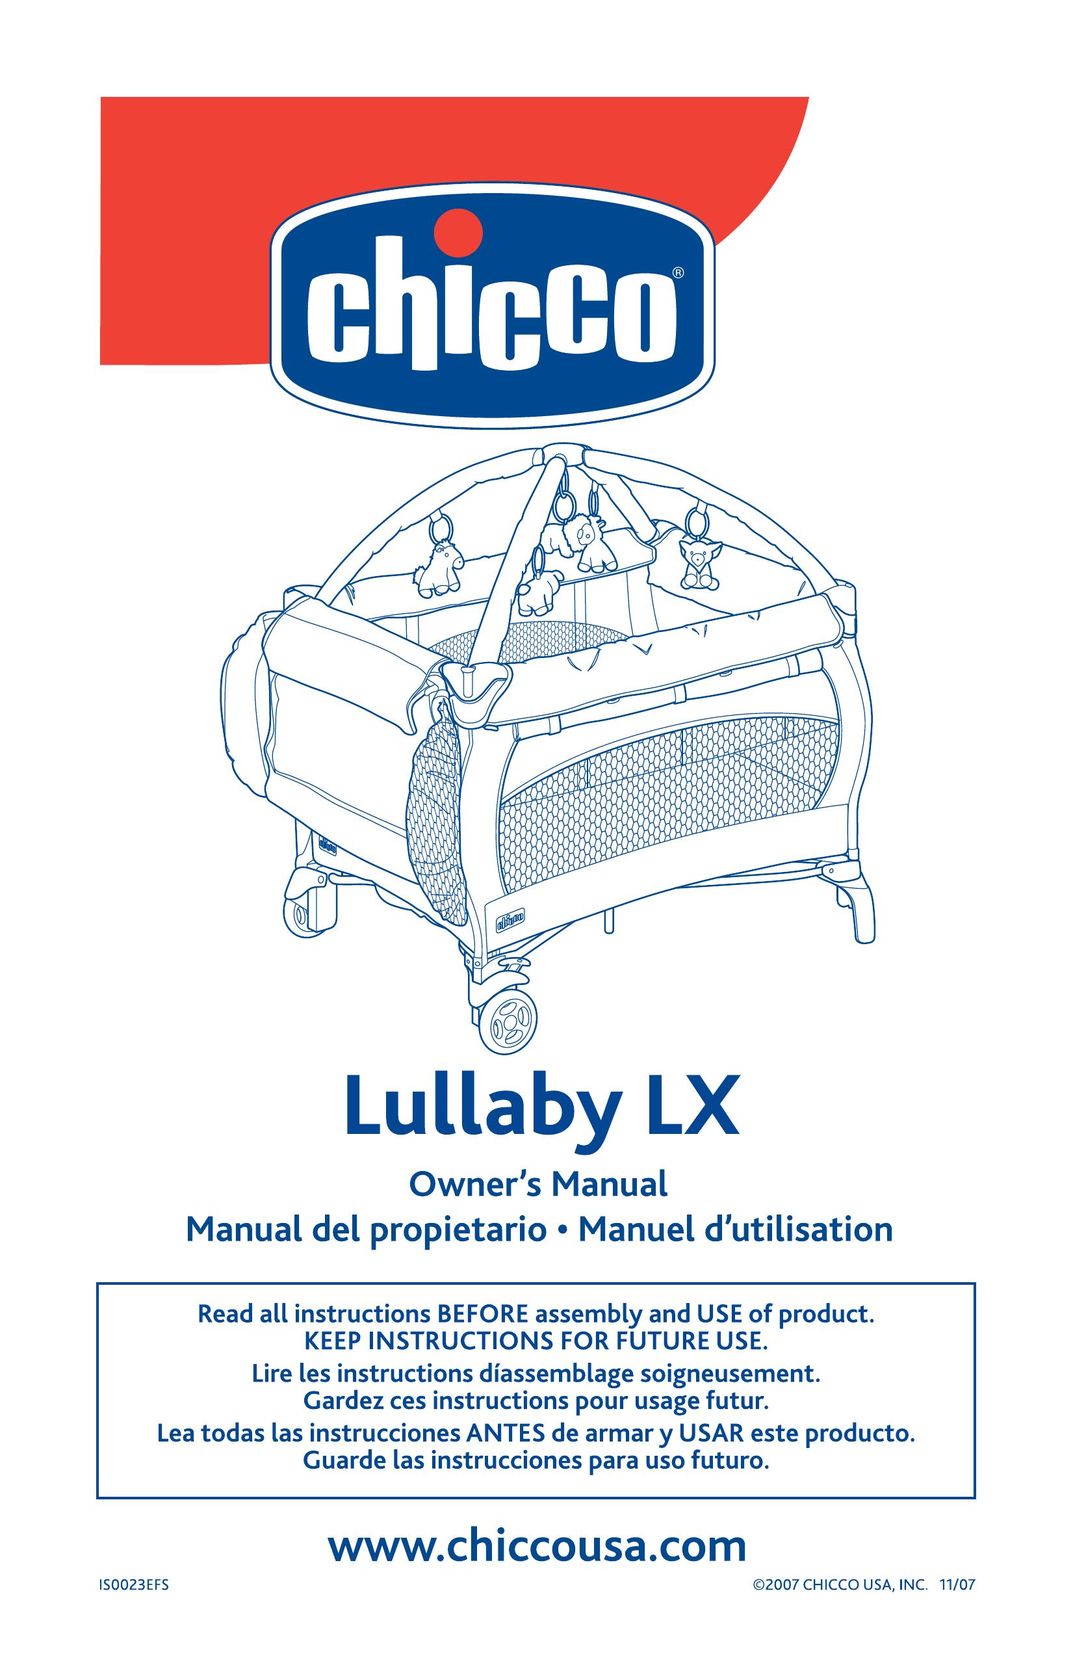 Chicco Lullaby LX Baby Playpen User Manual